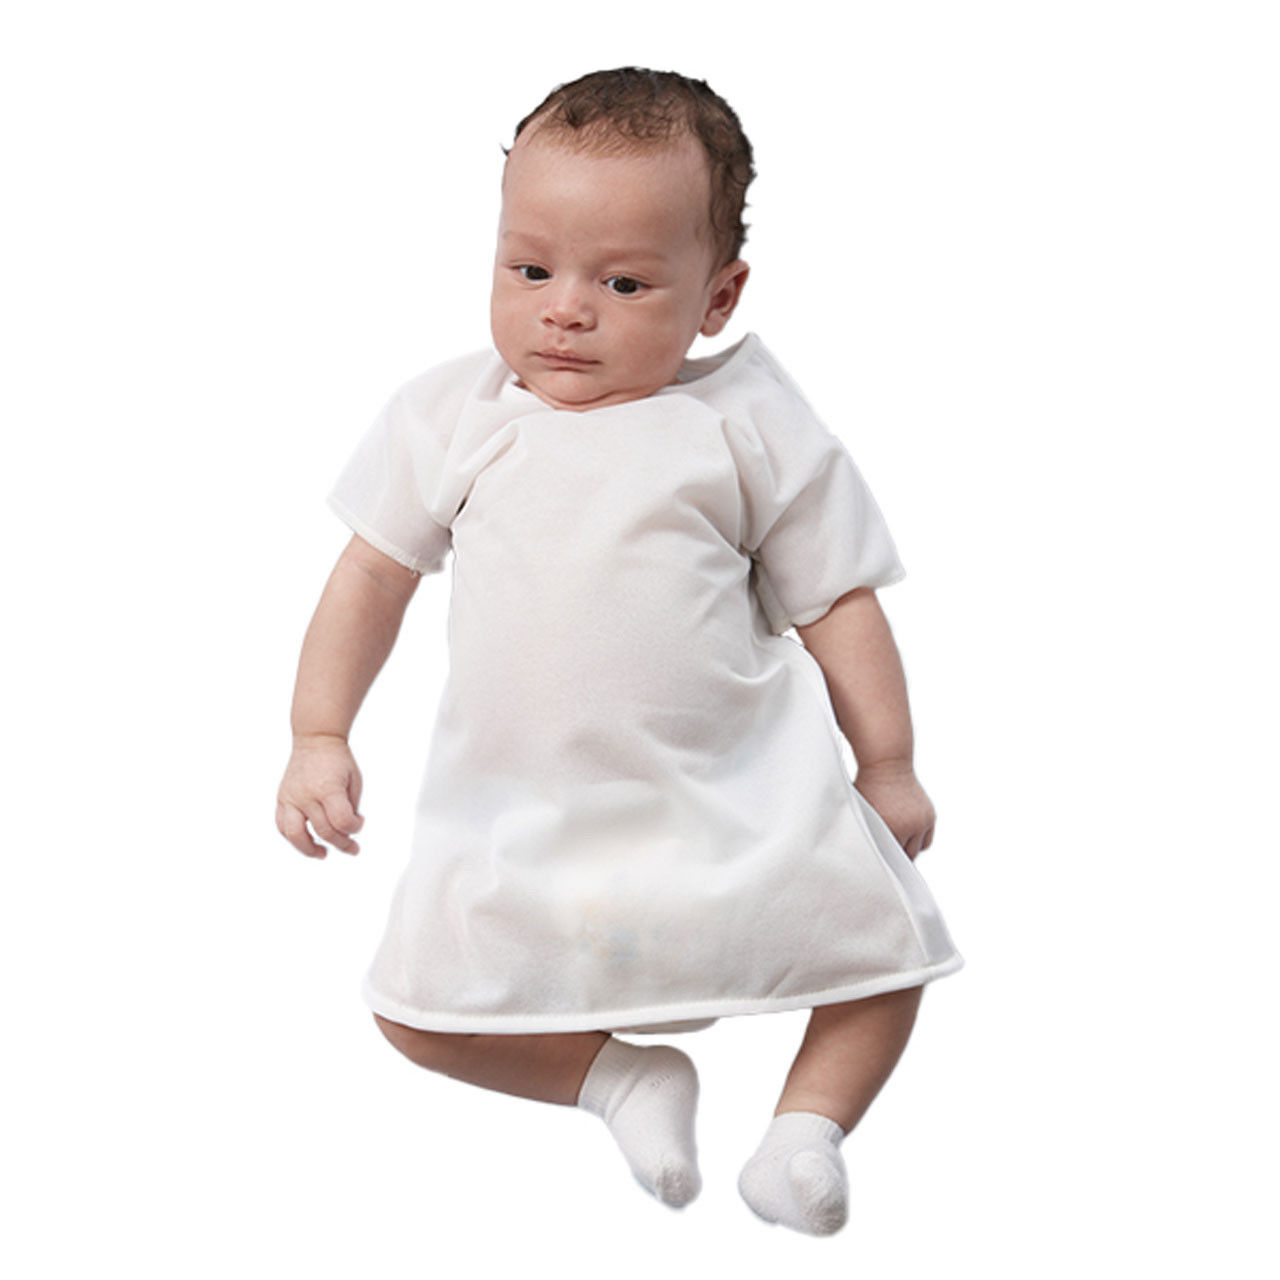 What is the count of self fabric ties on the baby hospital gown in Pediatric Hospital Gowns, White - In Bulk?